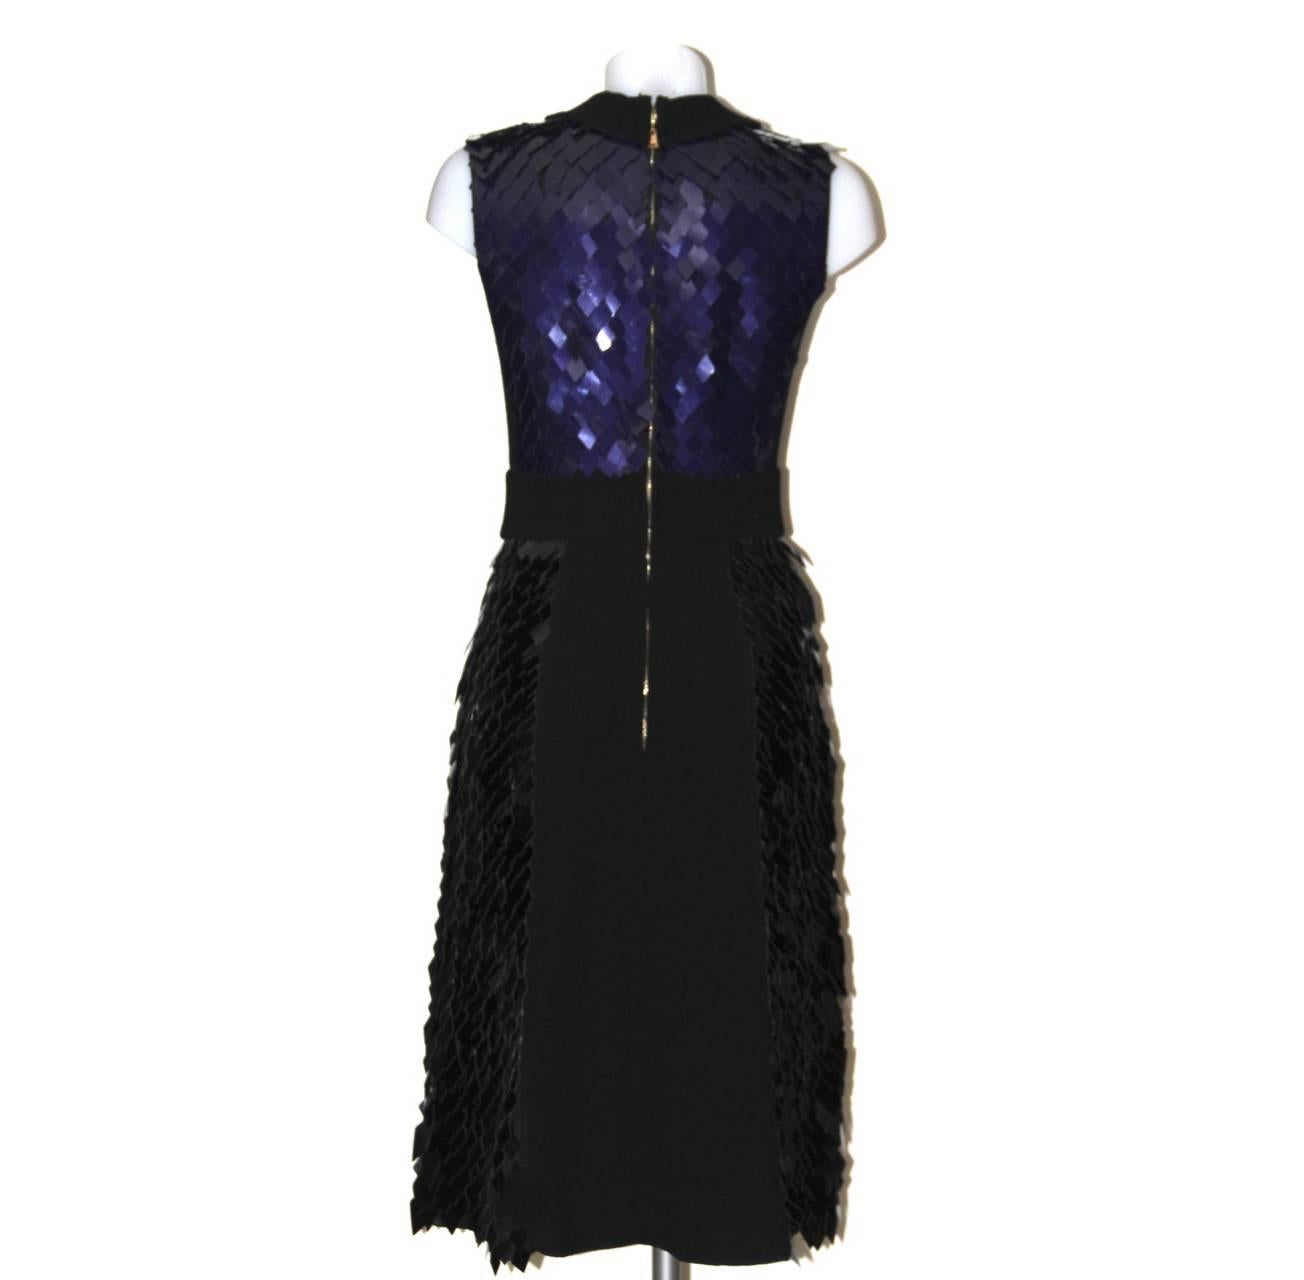 From the Louis Vuitton RTW Fall-Winter 2011 collection, this fancy dress is exquisitely cut in a silhouette inspired by the Brigitte Bardot-style. Crafted of black wool and saturated with shimmering purple XL square sequins, this luxurious